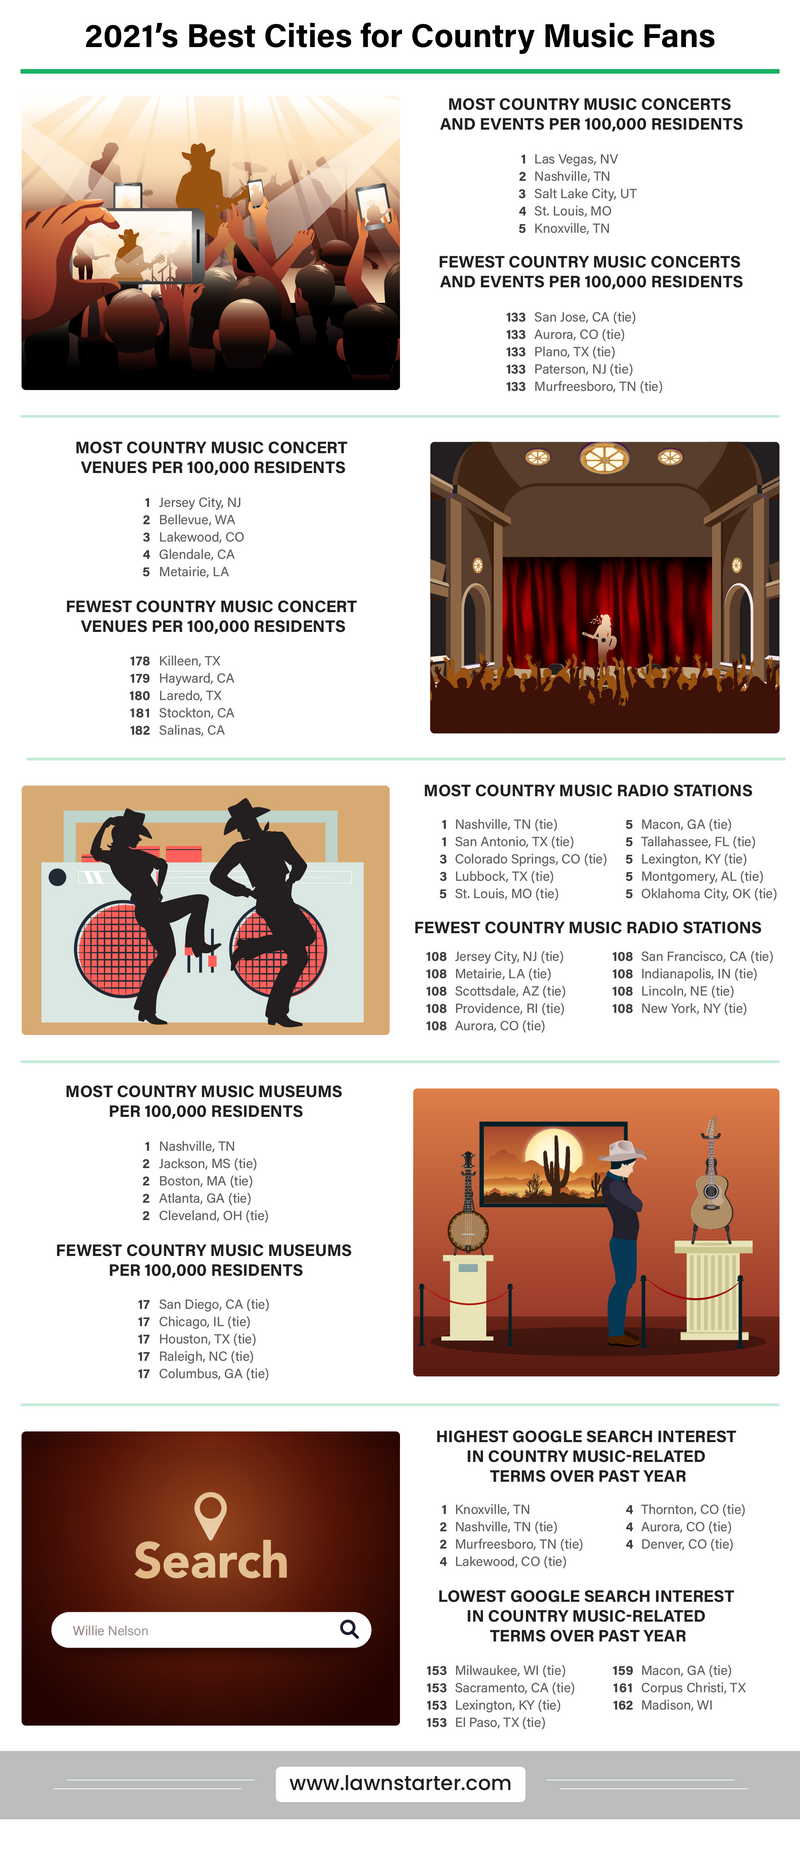 Infographic showing the best cities for country music fans, a ranking based on access to concerts, concert venues, radio stations, and more